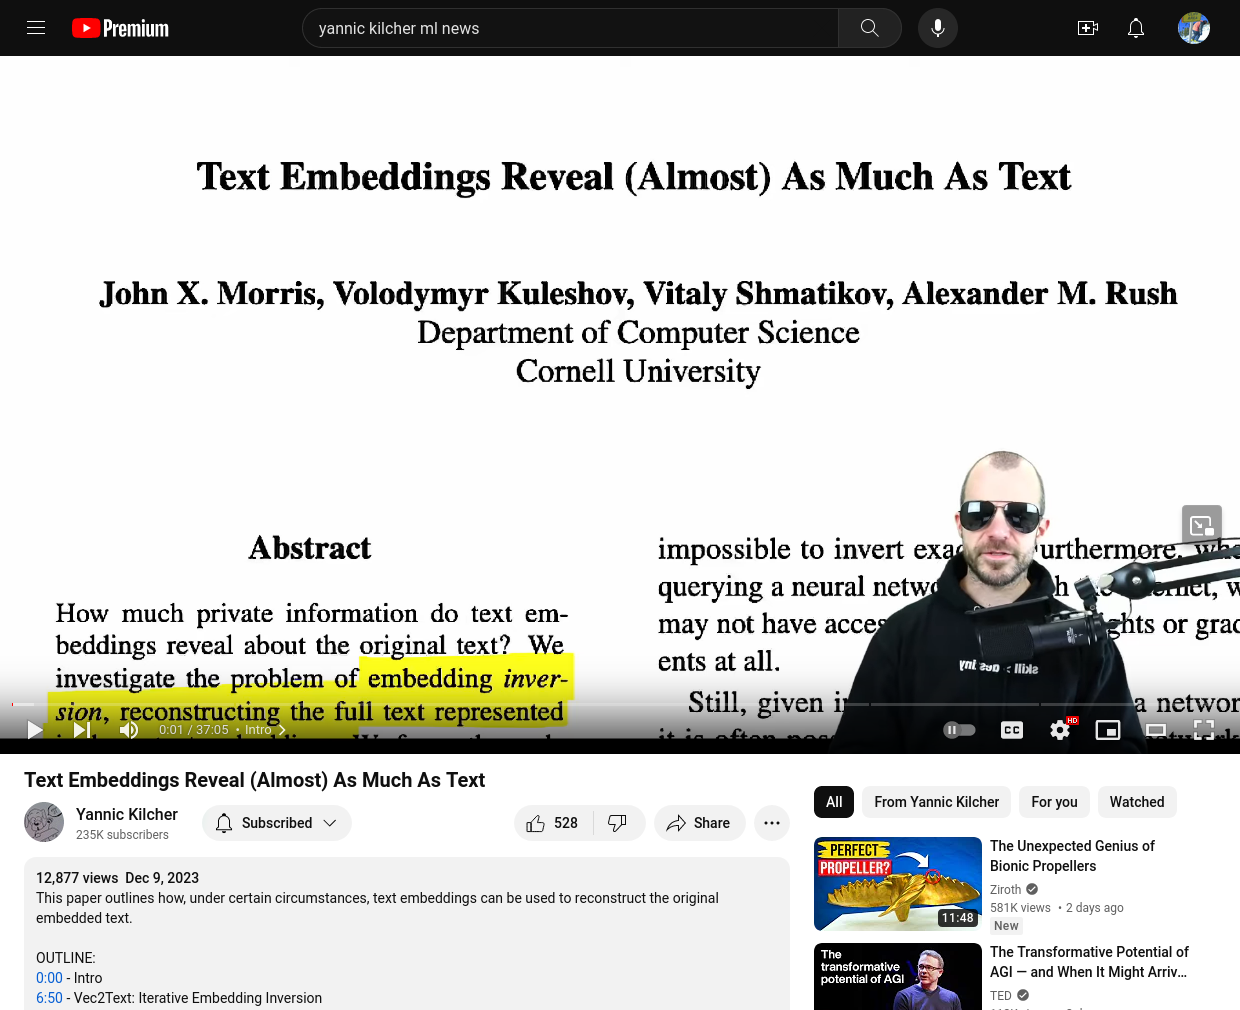 screenshot of Yannic Kilcher's YouTube video "Text Embedding Reveal (Almost) As Much As Text"